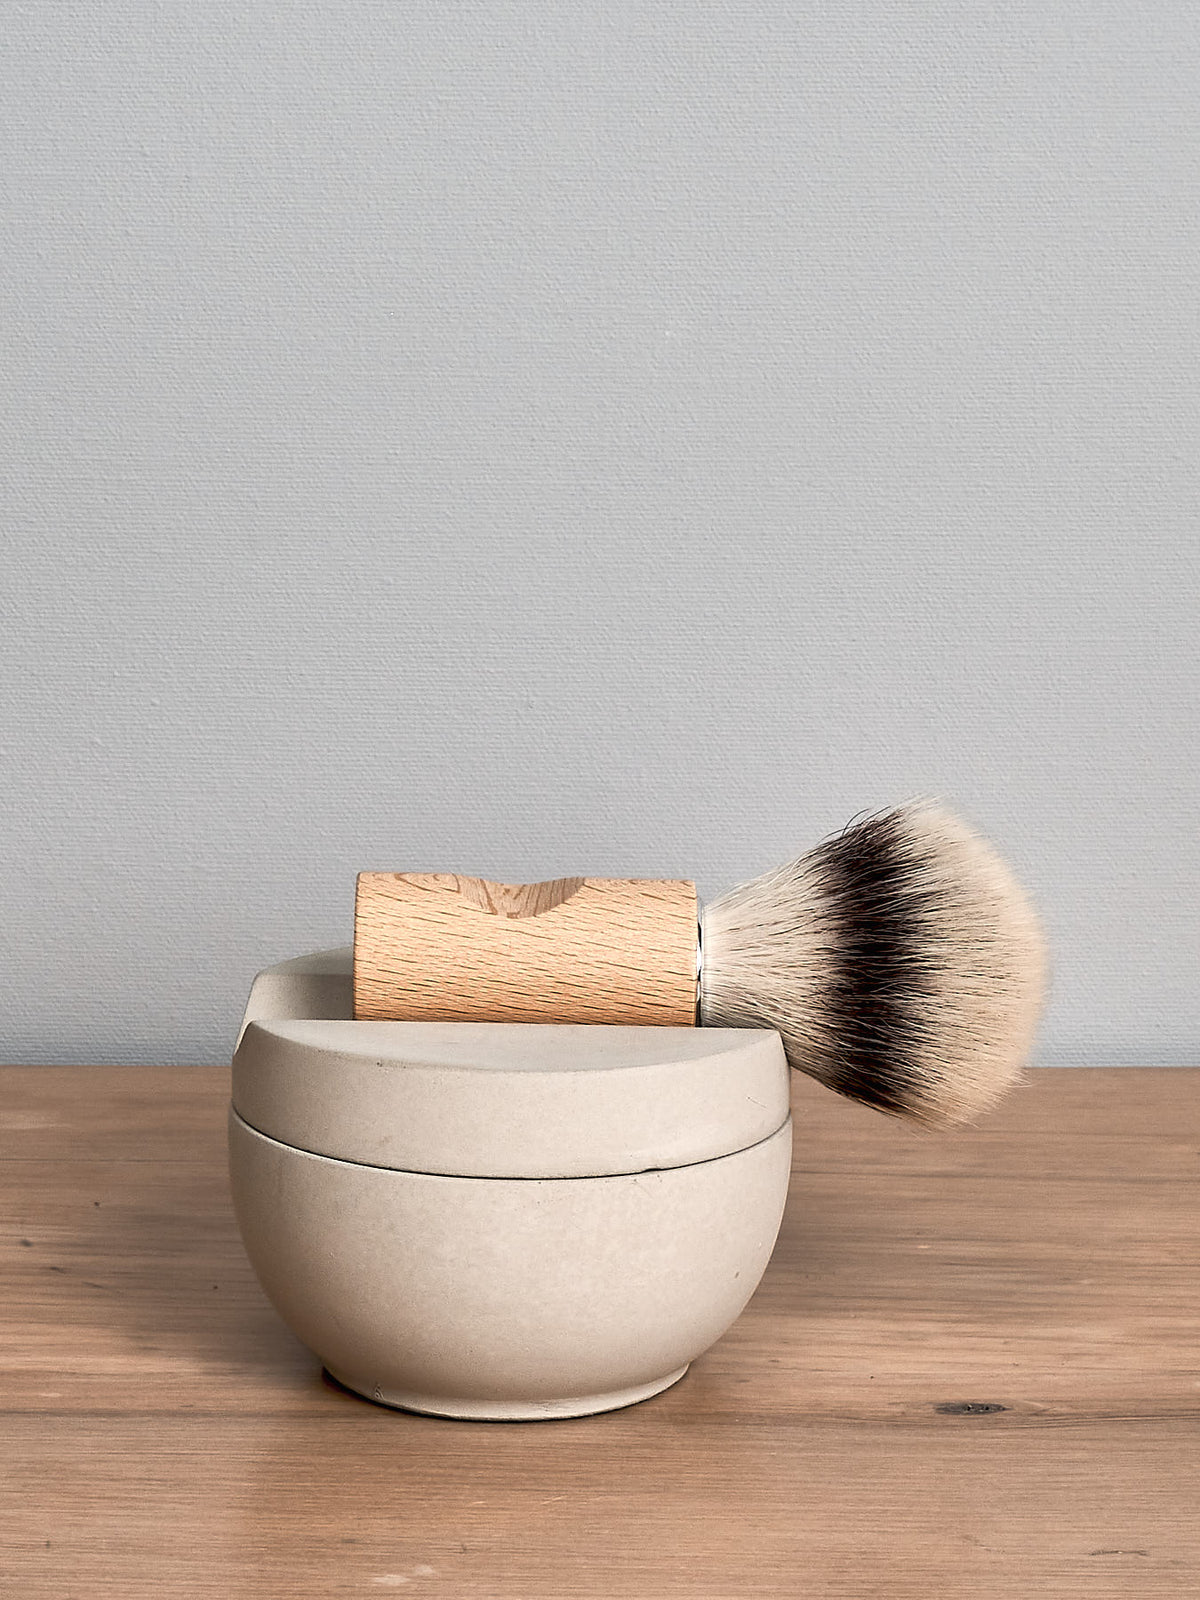 An Iris Hantverk Shaving Brush &amp; Cup with Cedarwood Soap sits on top of a wooden bowl.